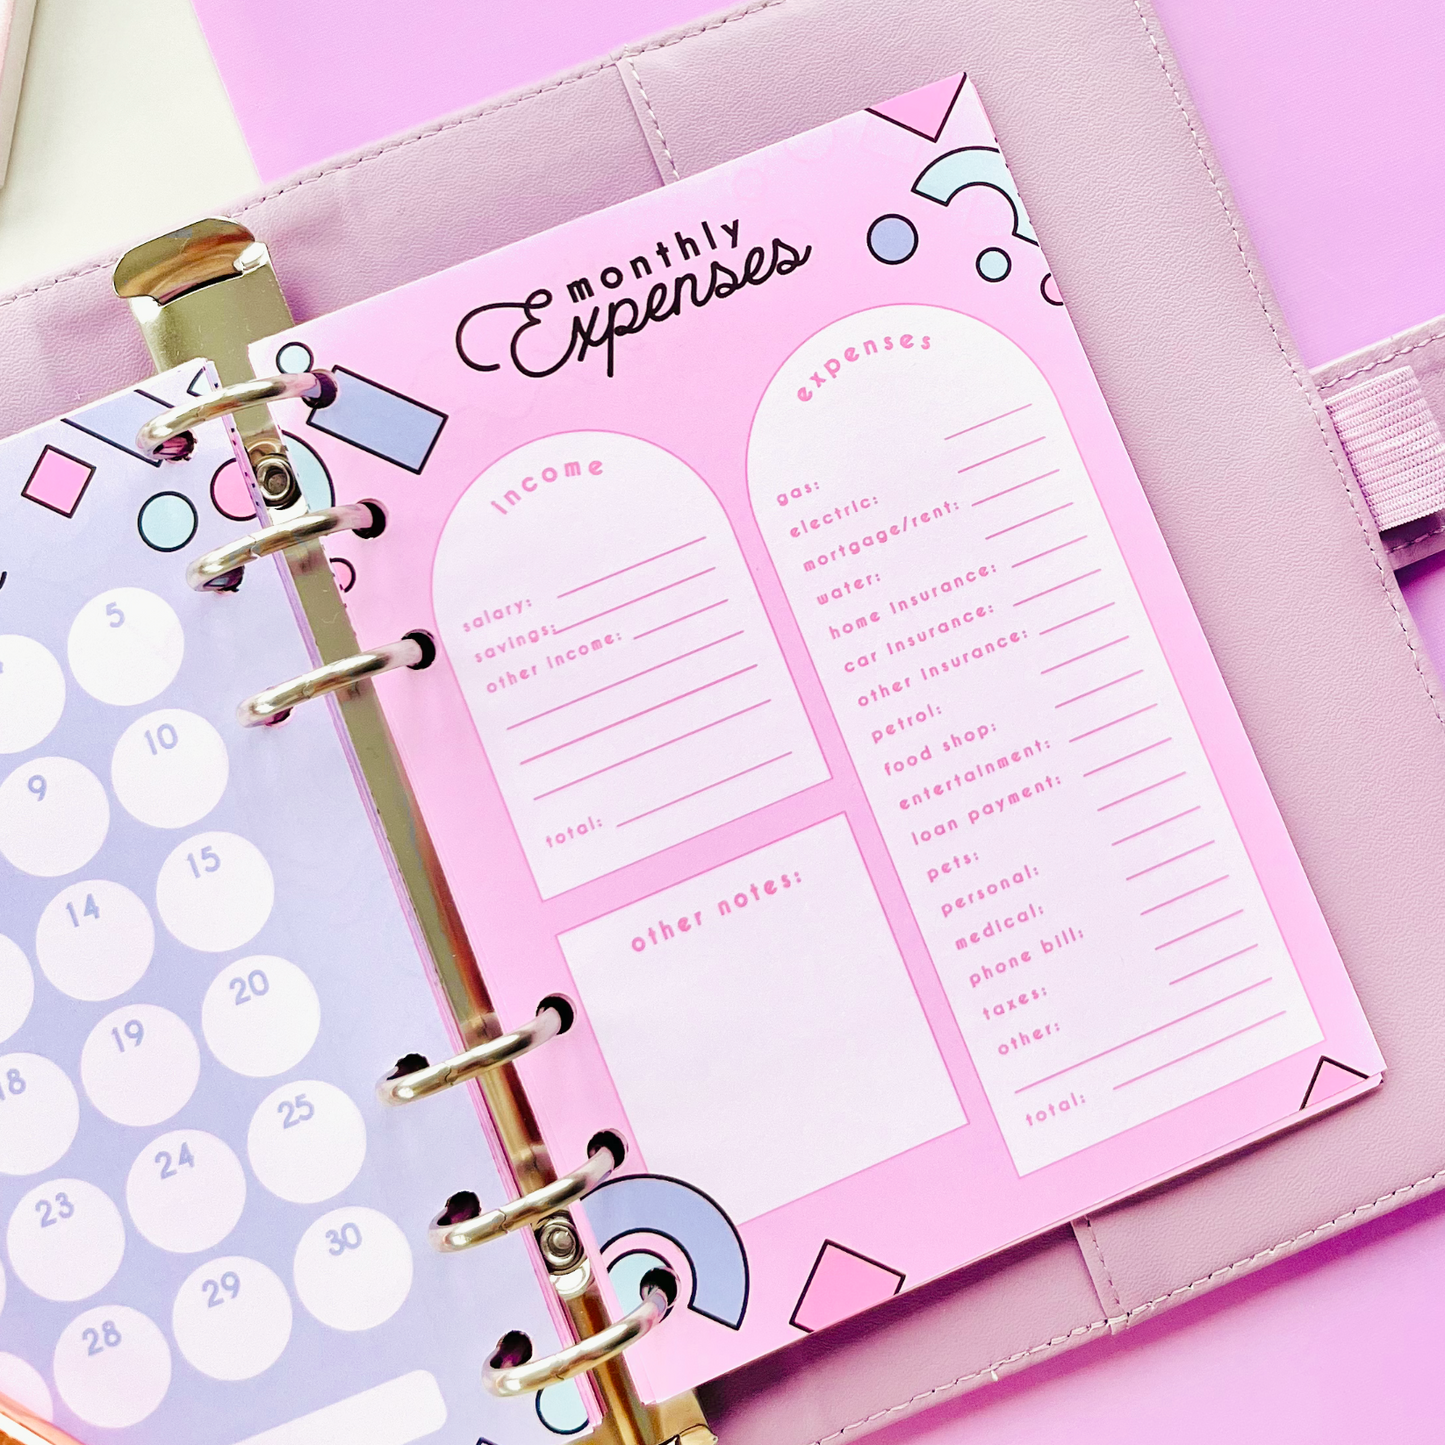 Budget Planner Pages (Download)